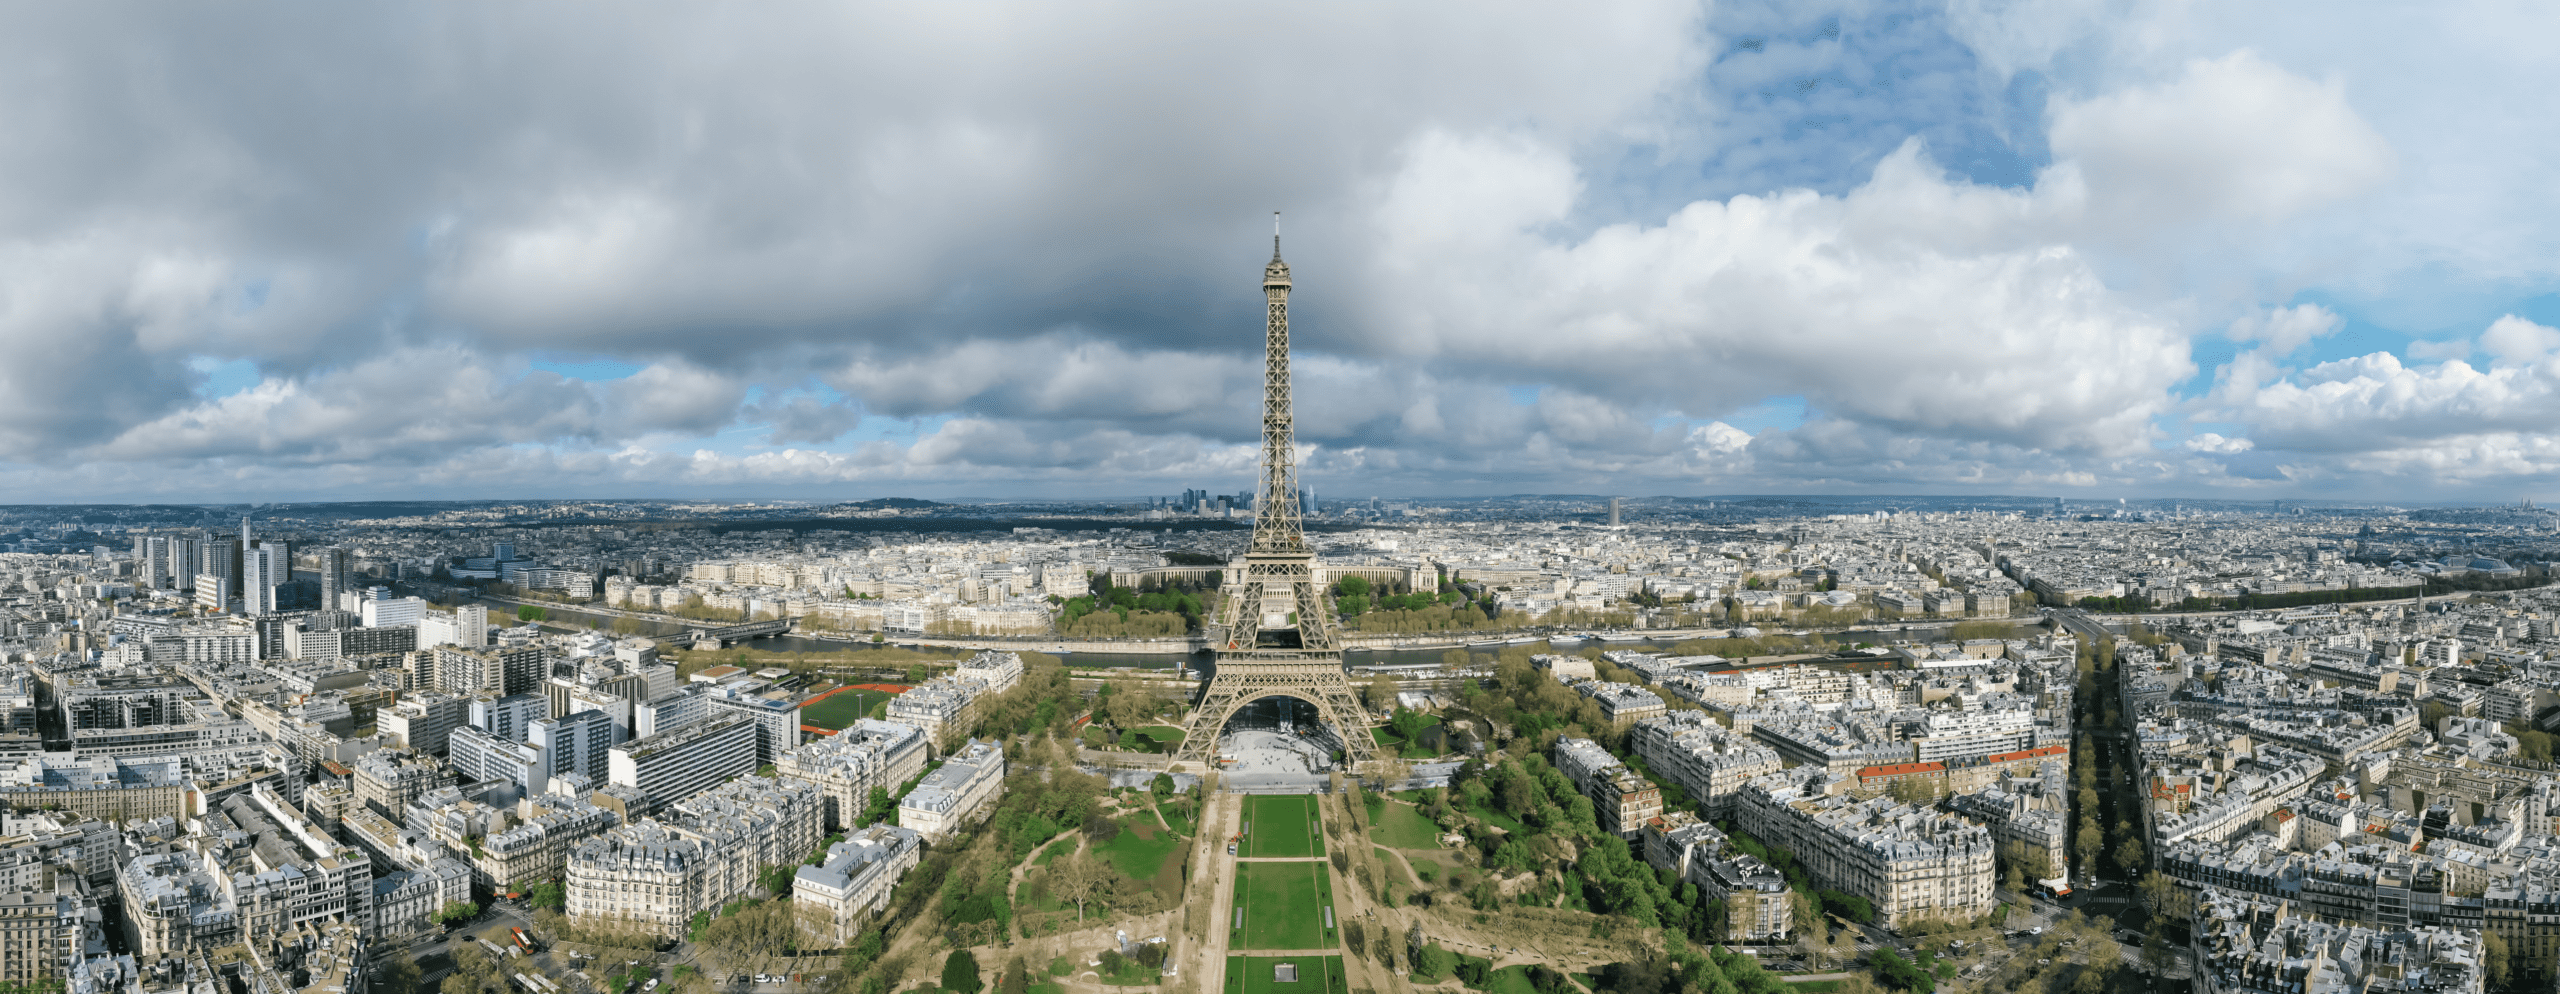 Drone shot of paris with eiffel tower